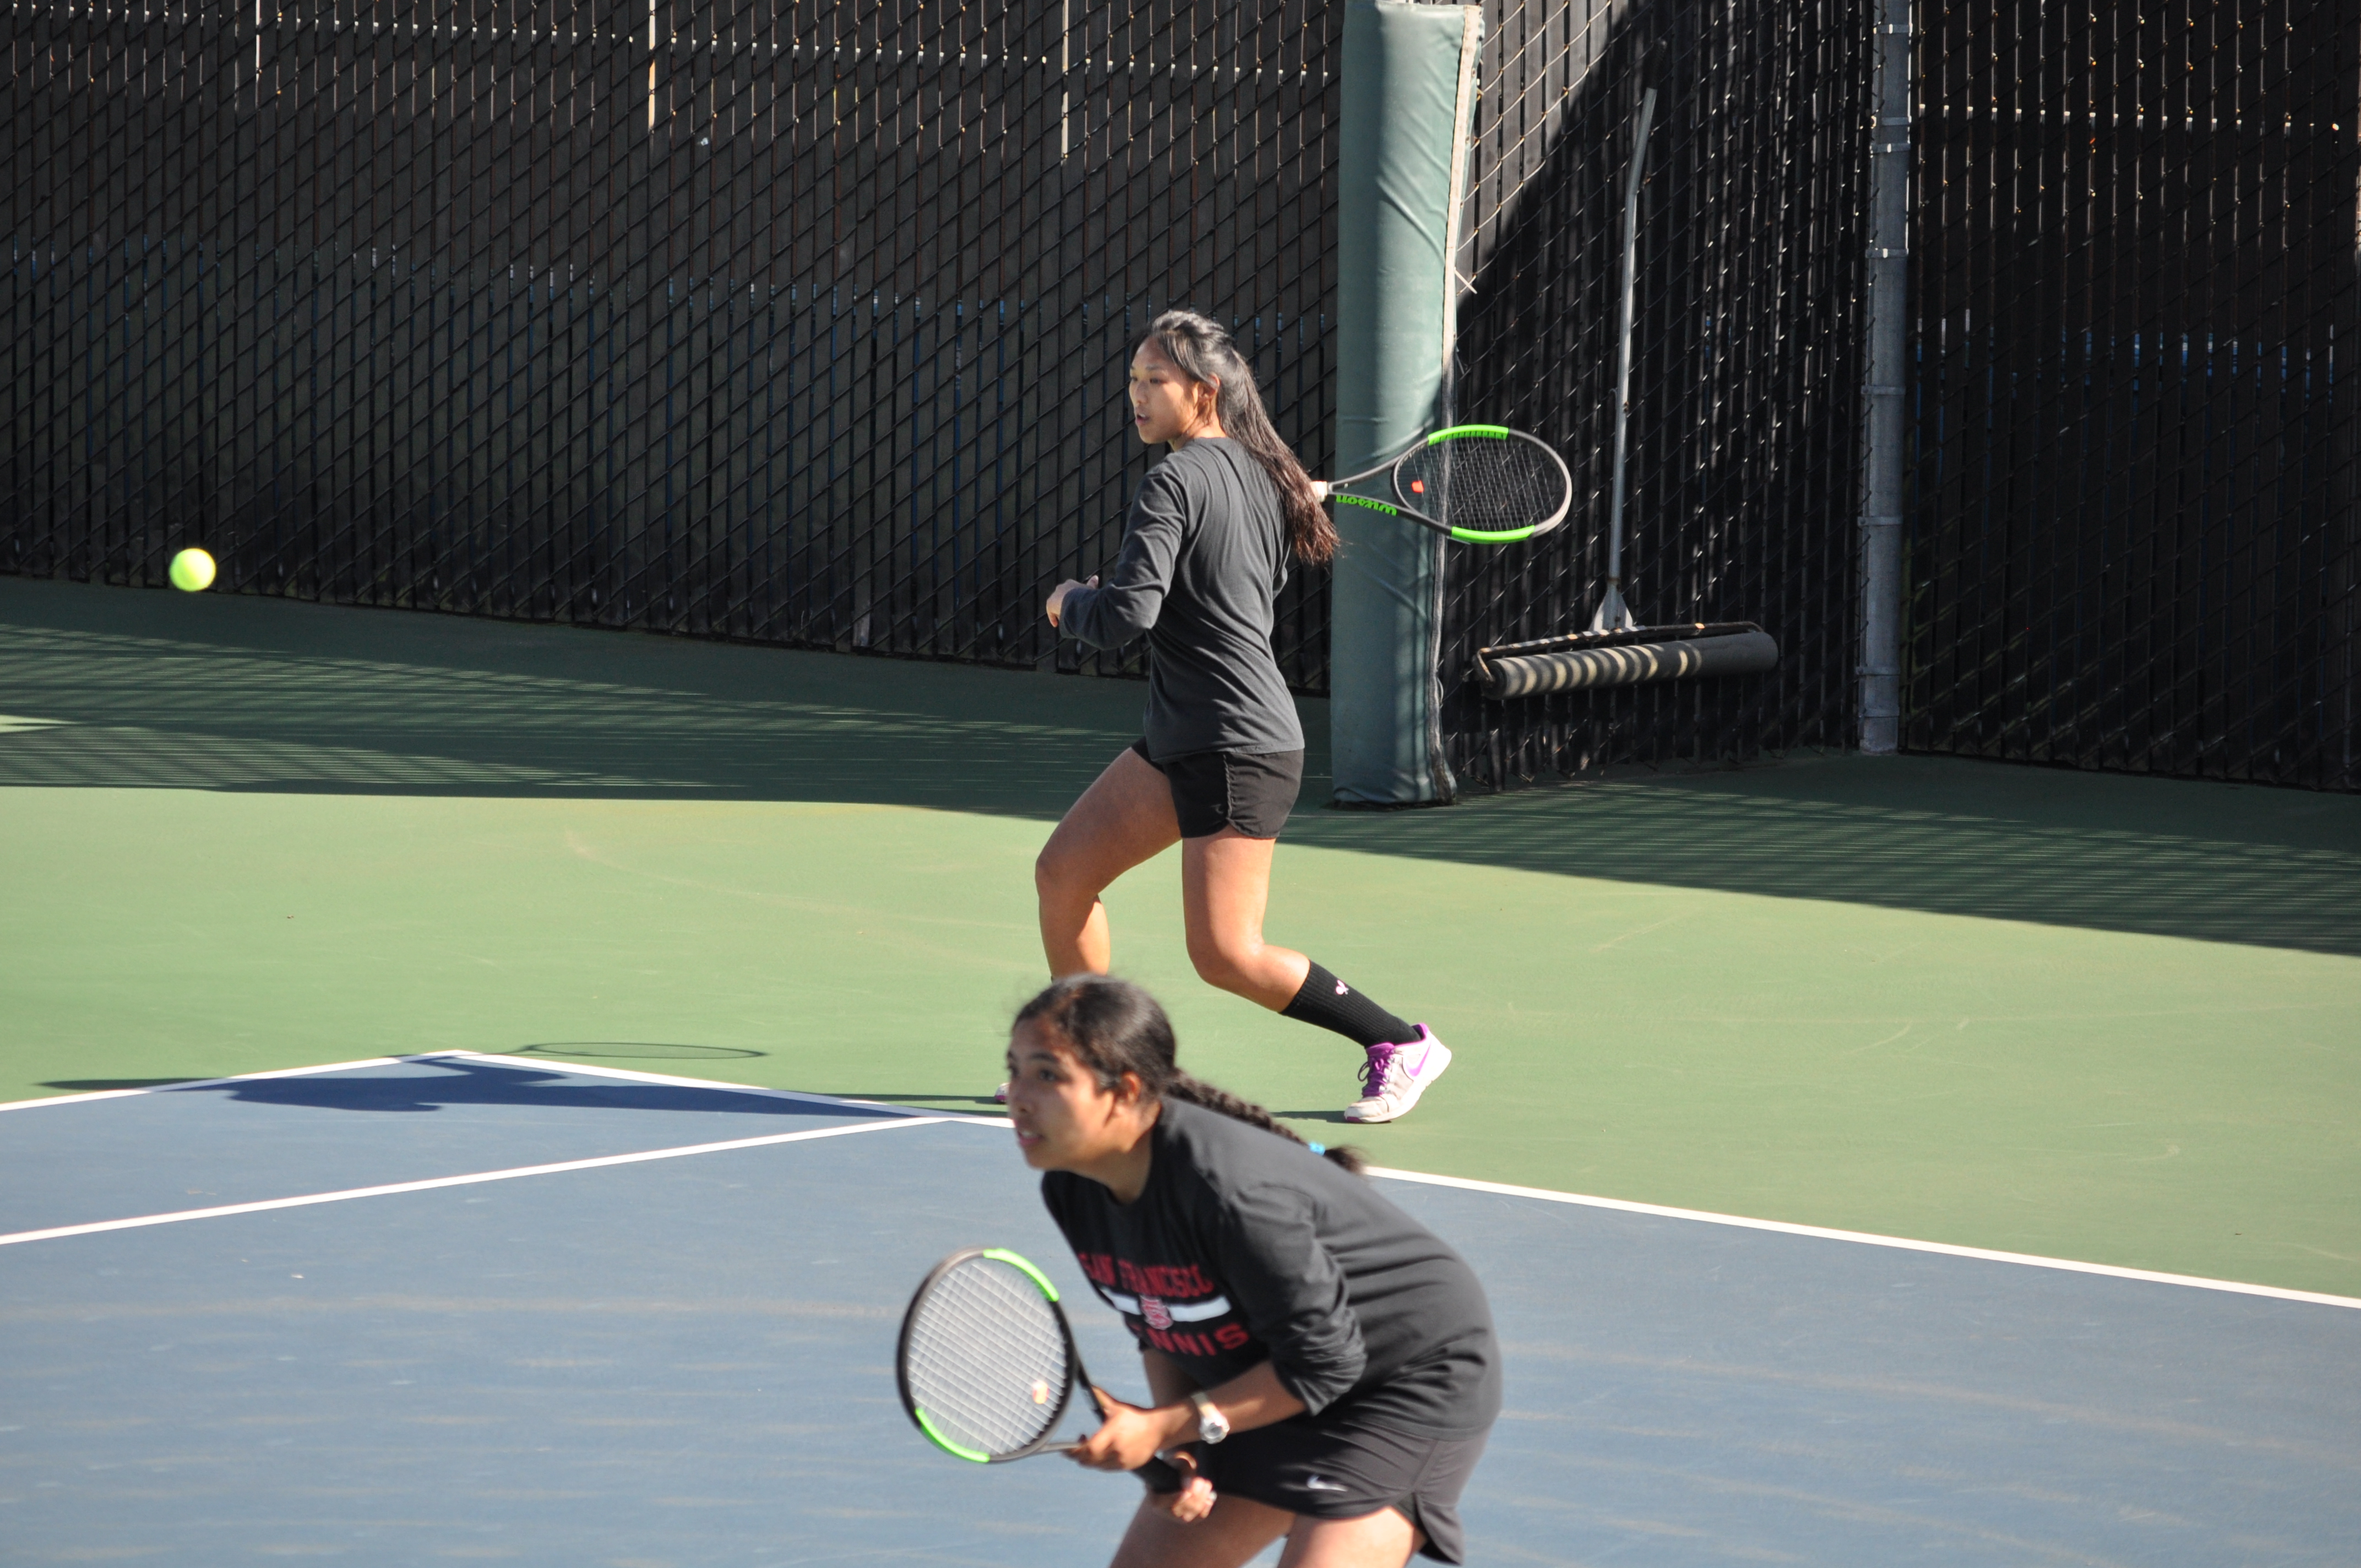 Sophomore Yvonee Ng (right) serves during doubles play with Abigail Campos (left) against Cabrillo College on March 16, 2018. Photo by Peter J. Suter/The Guardsman.